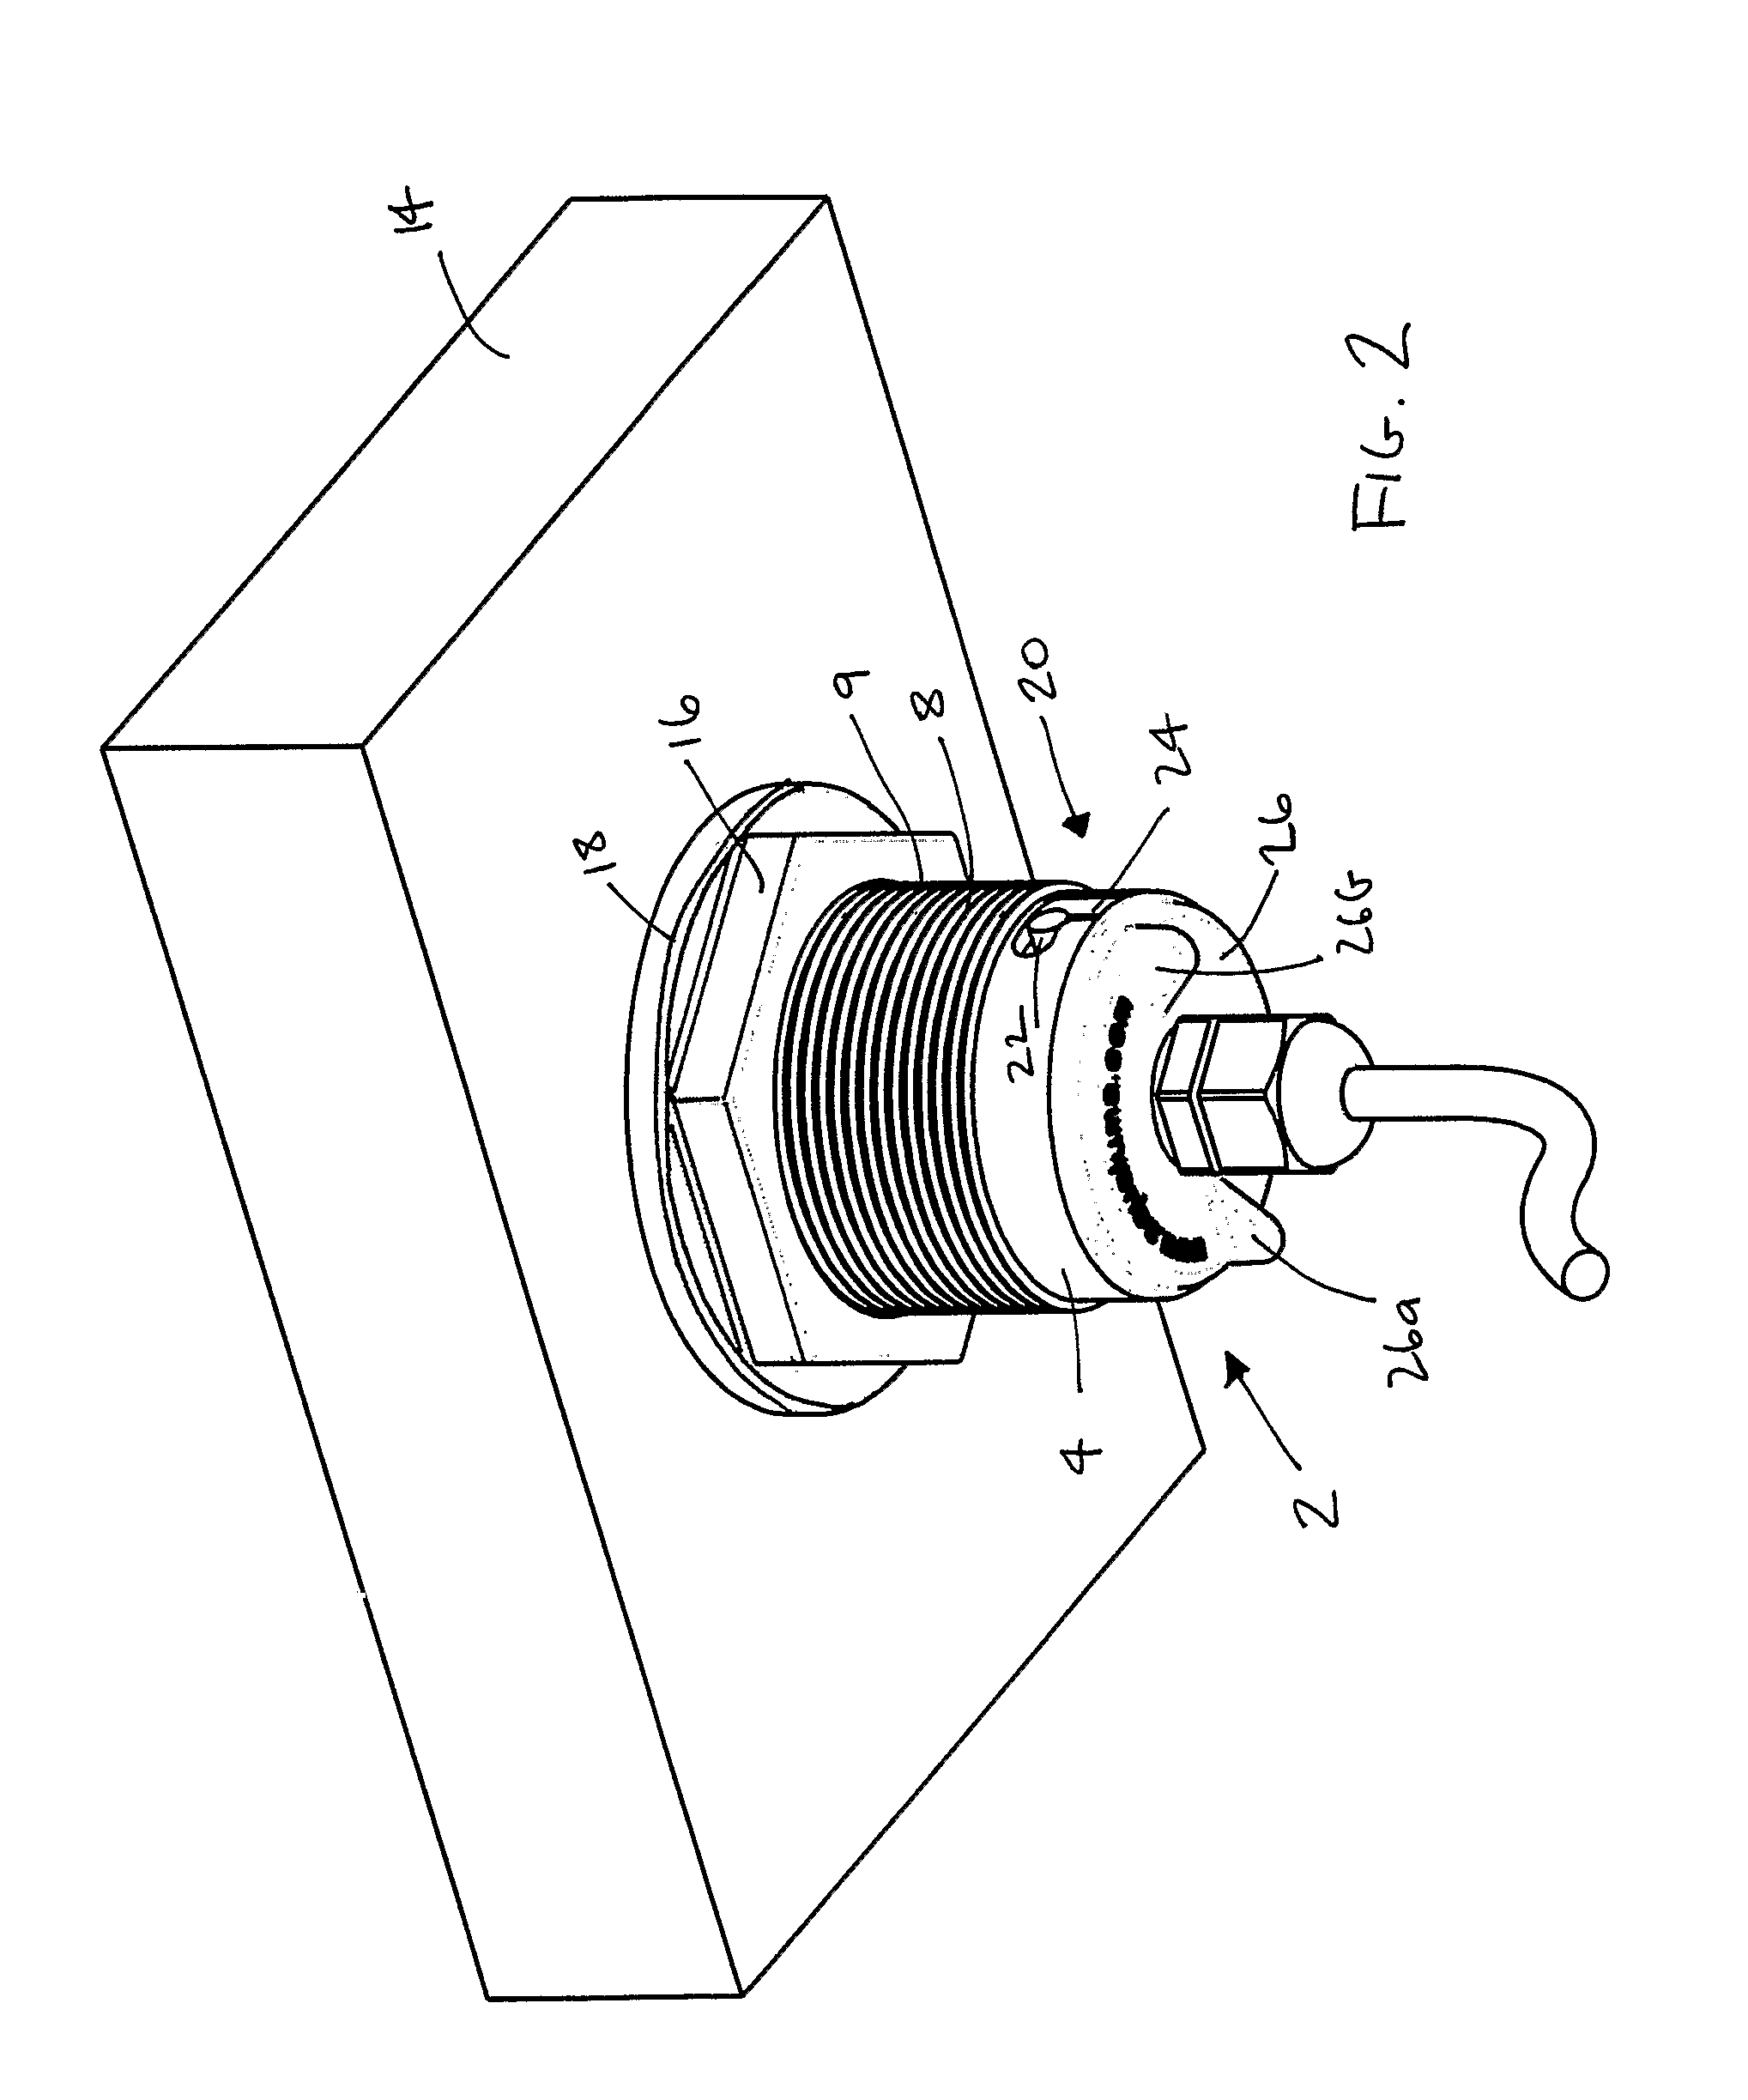 LED lighting apparatus in a plastic housing